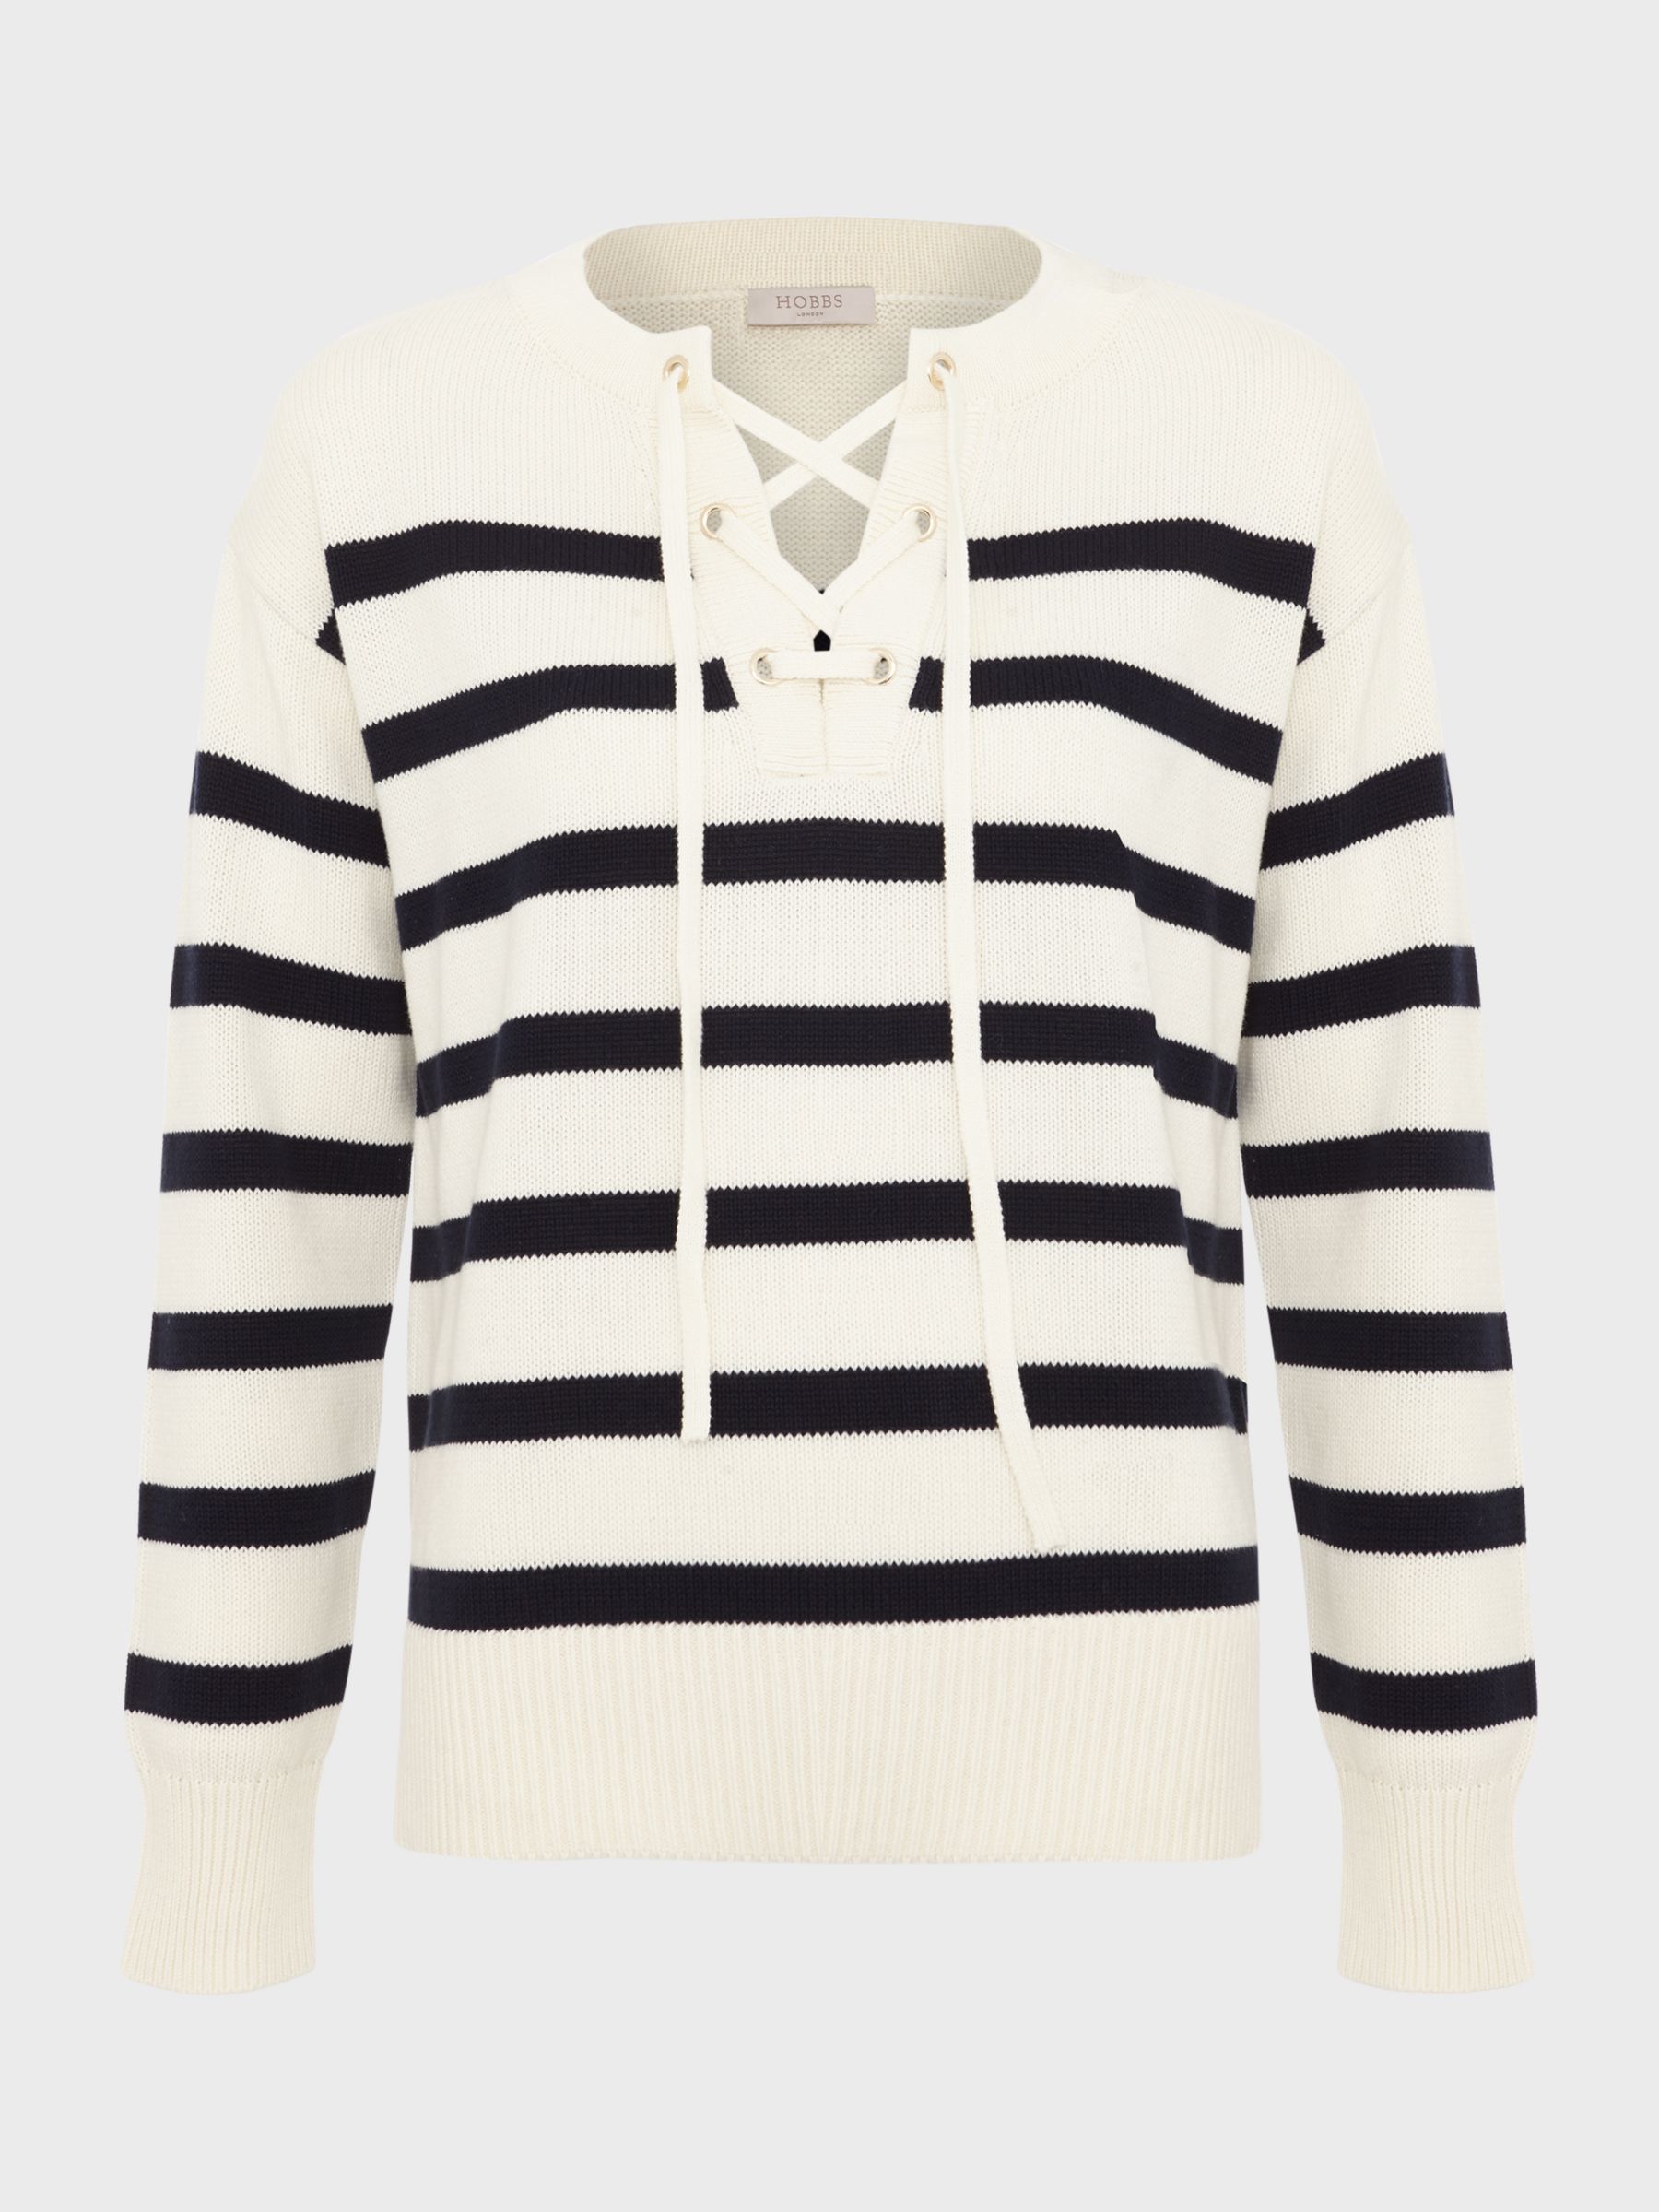 Hobbs Danica Striped Cotton Lace-Up Neck Jumper, Ivory/Navy, L